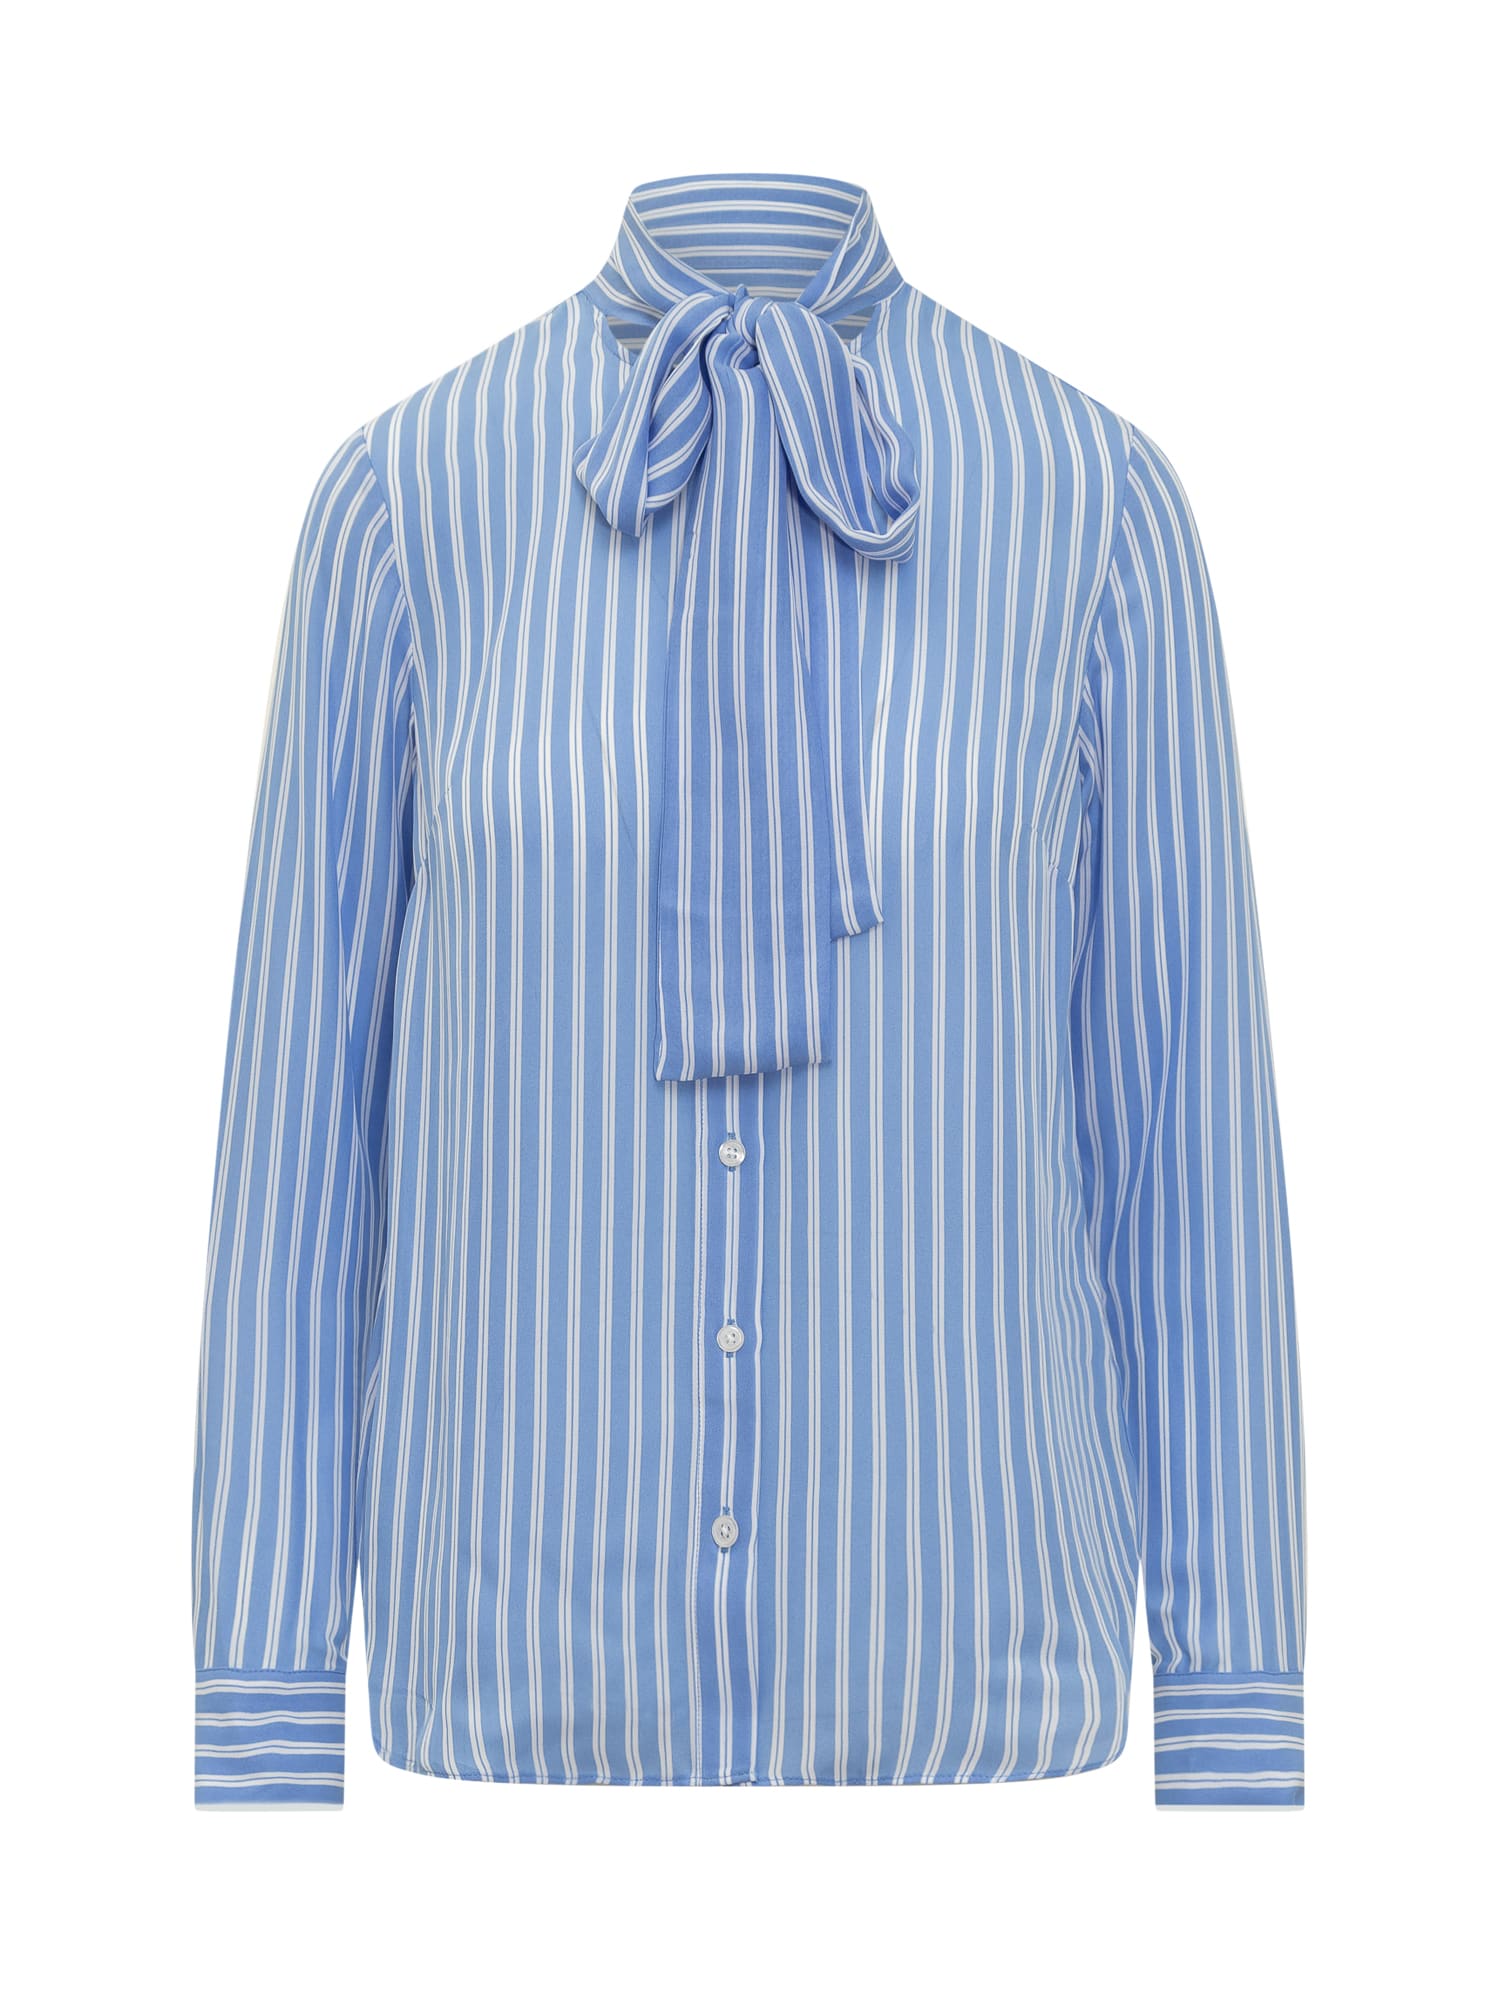 MICHAEL KORS BLOUSE WITH BOW